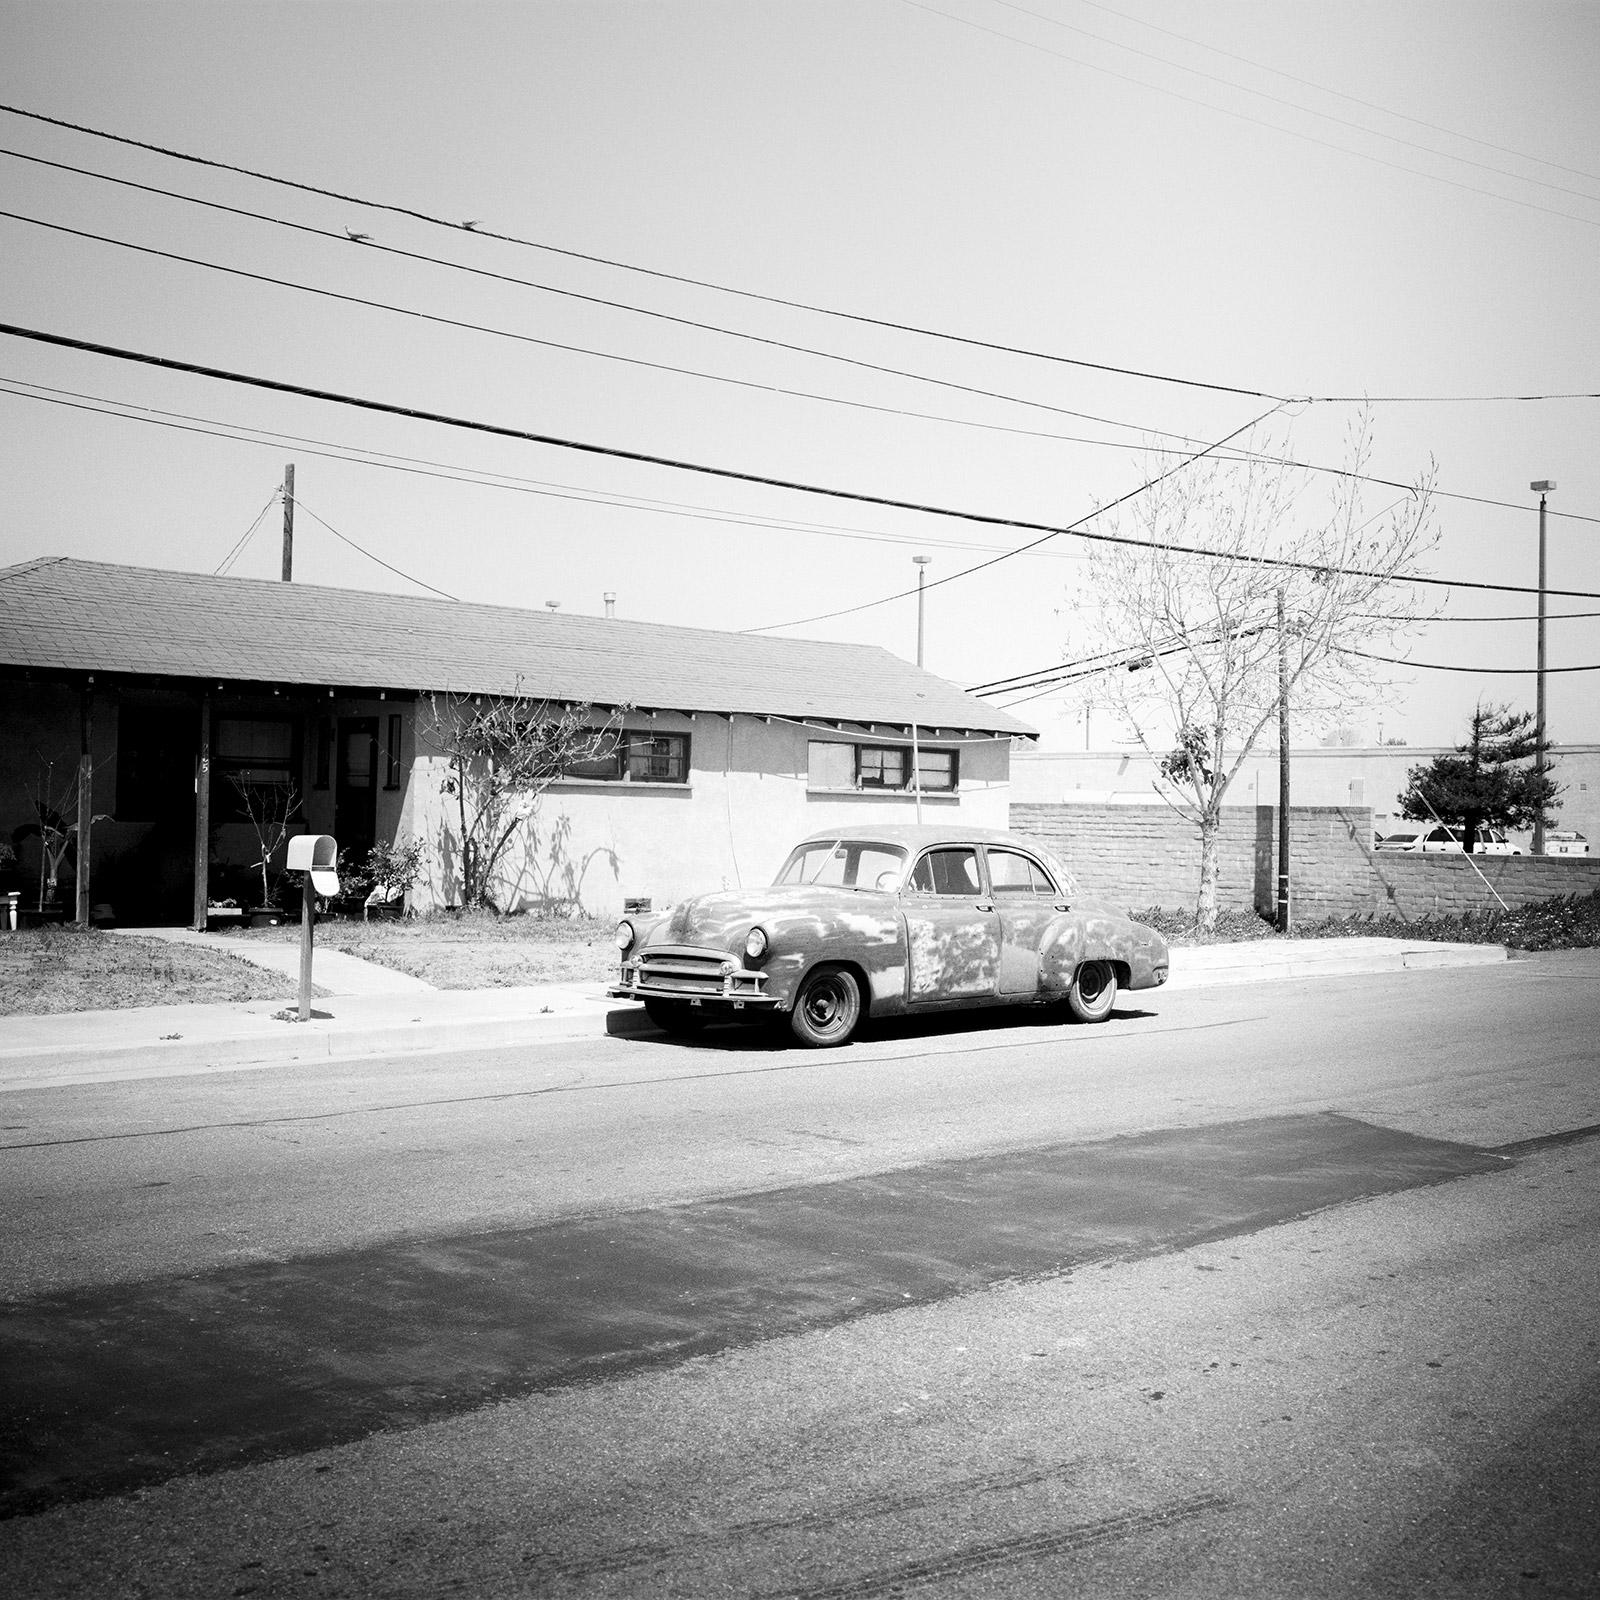 Gerald Berghammer Black and White Photograph - House 285, Old Car, Arizona, USA, black and white photography, landscape